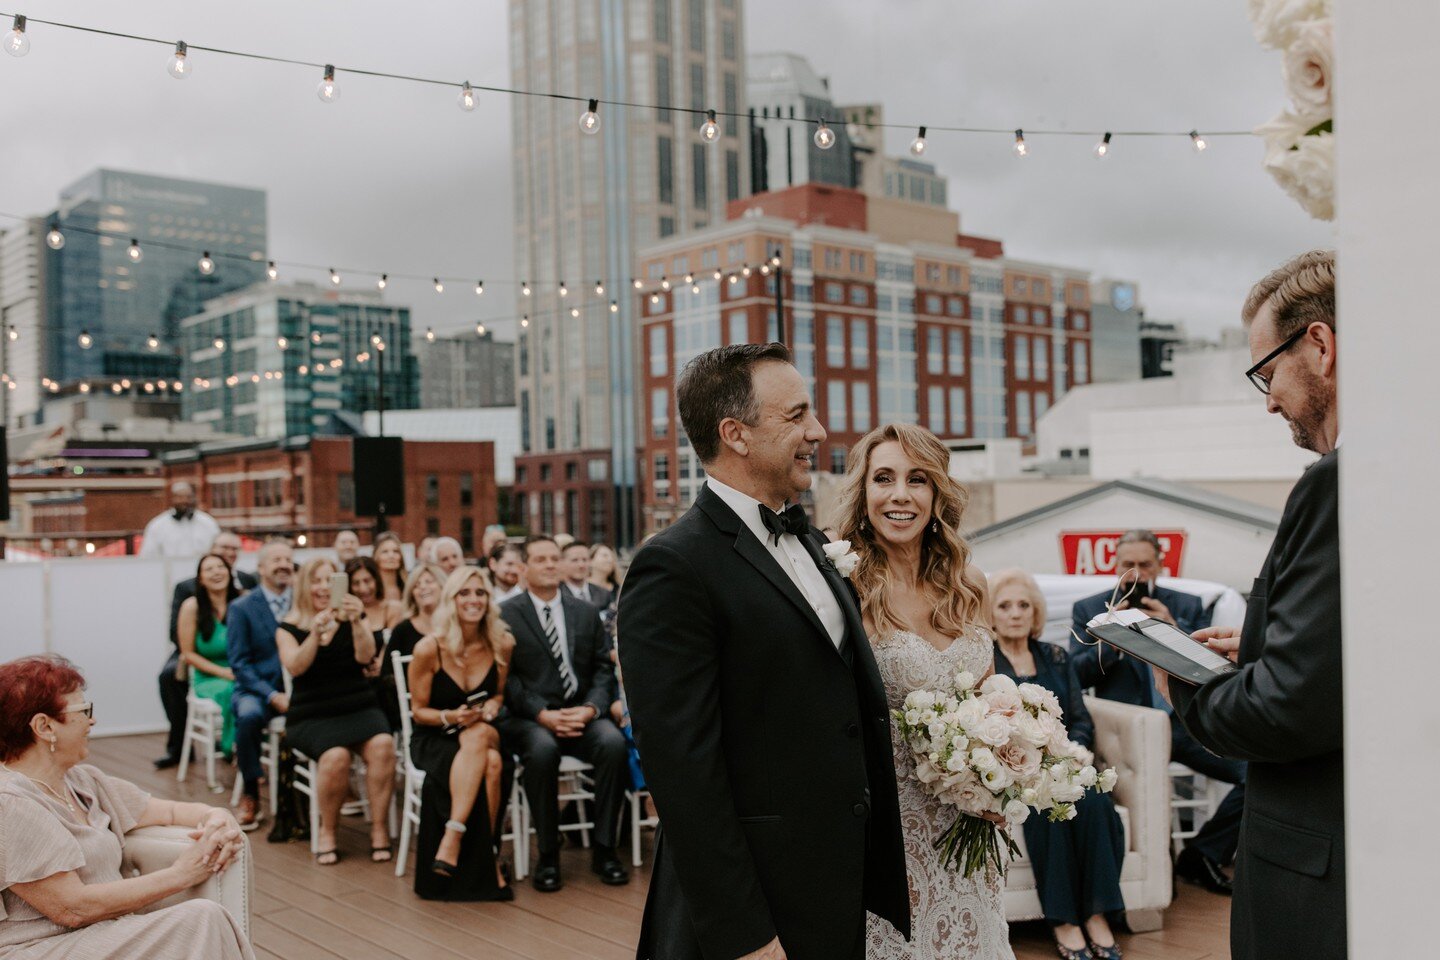 Just for the record, I would not object to more rooftop weddings in my future 😉